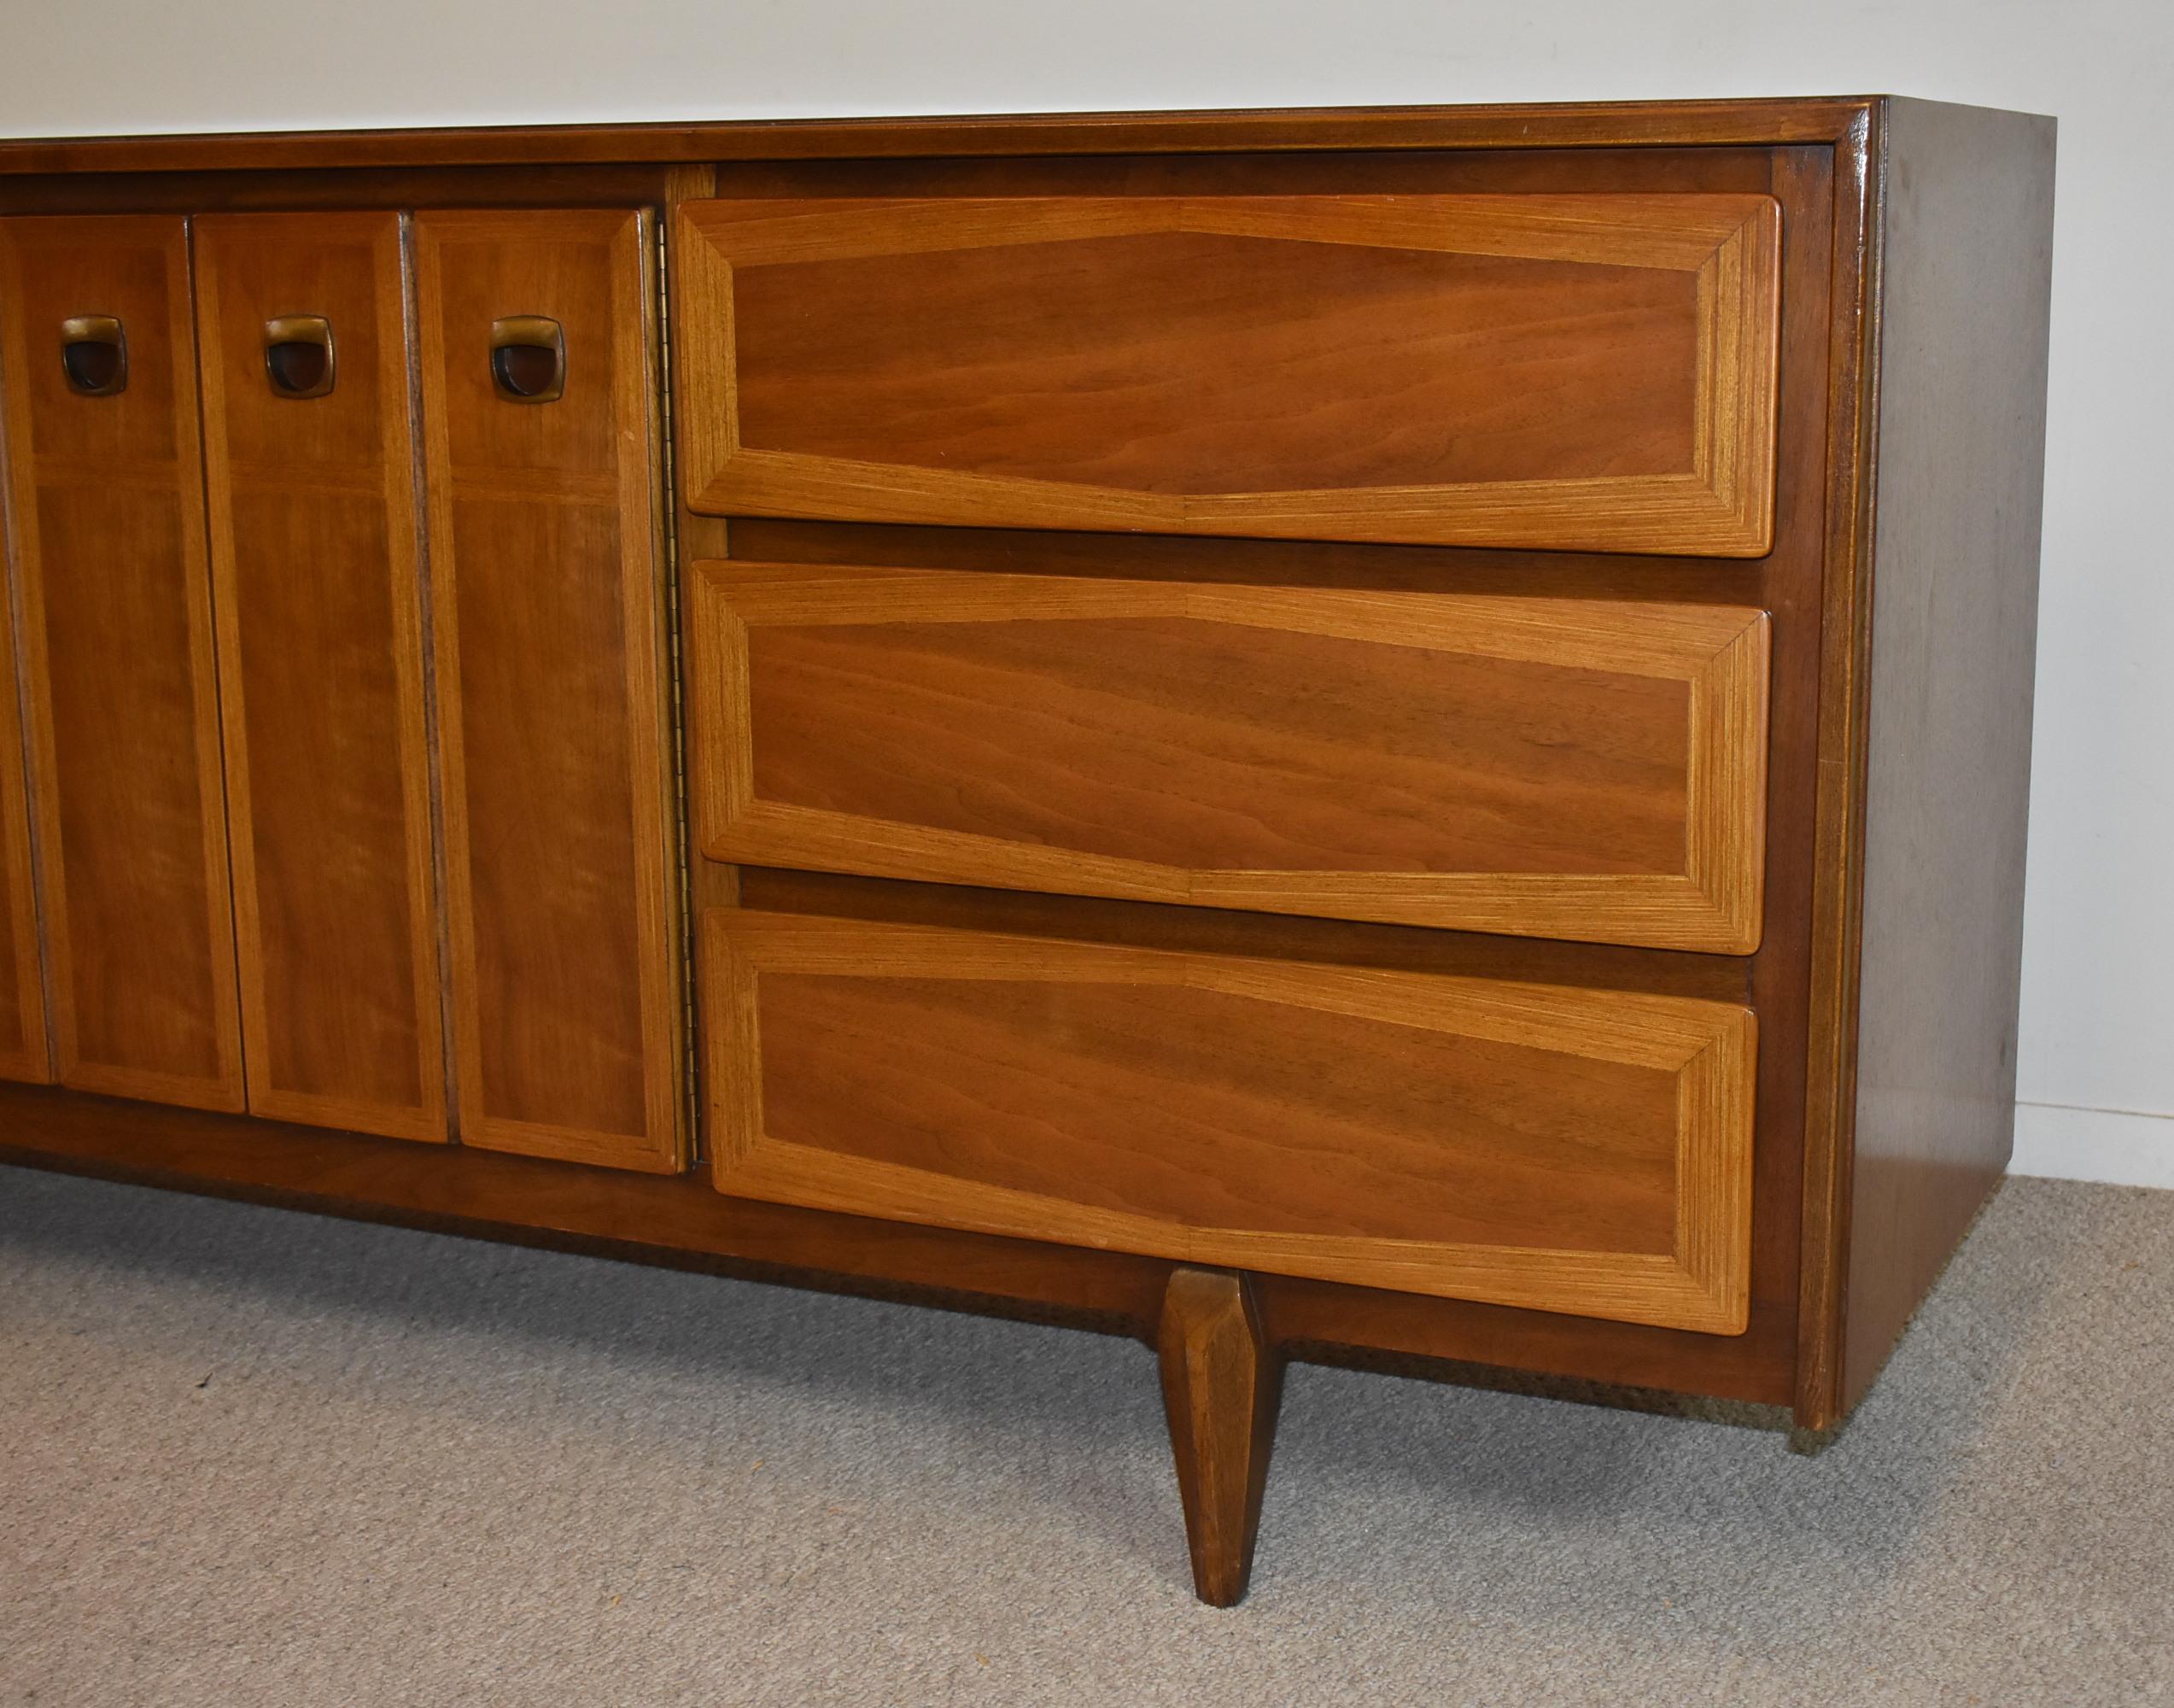 Walnut mid-century modern dresser credenza by American of Martinsville. 6 drawers, 2 center doors with 3 drawers inside. Part of a 4-piece set. Great condition. 74